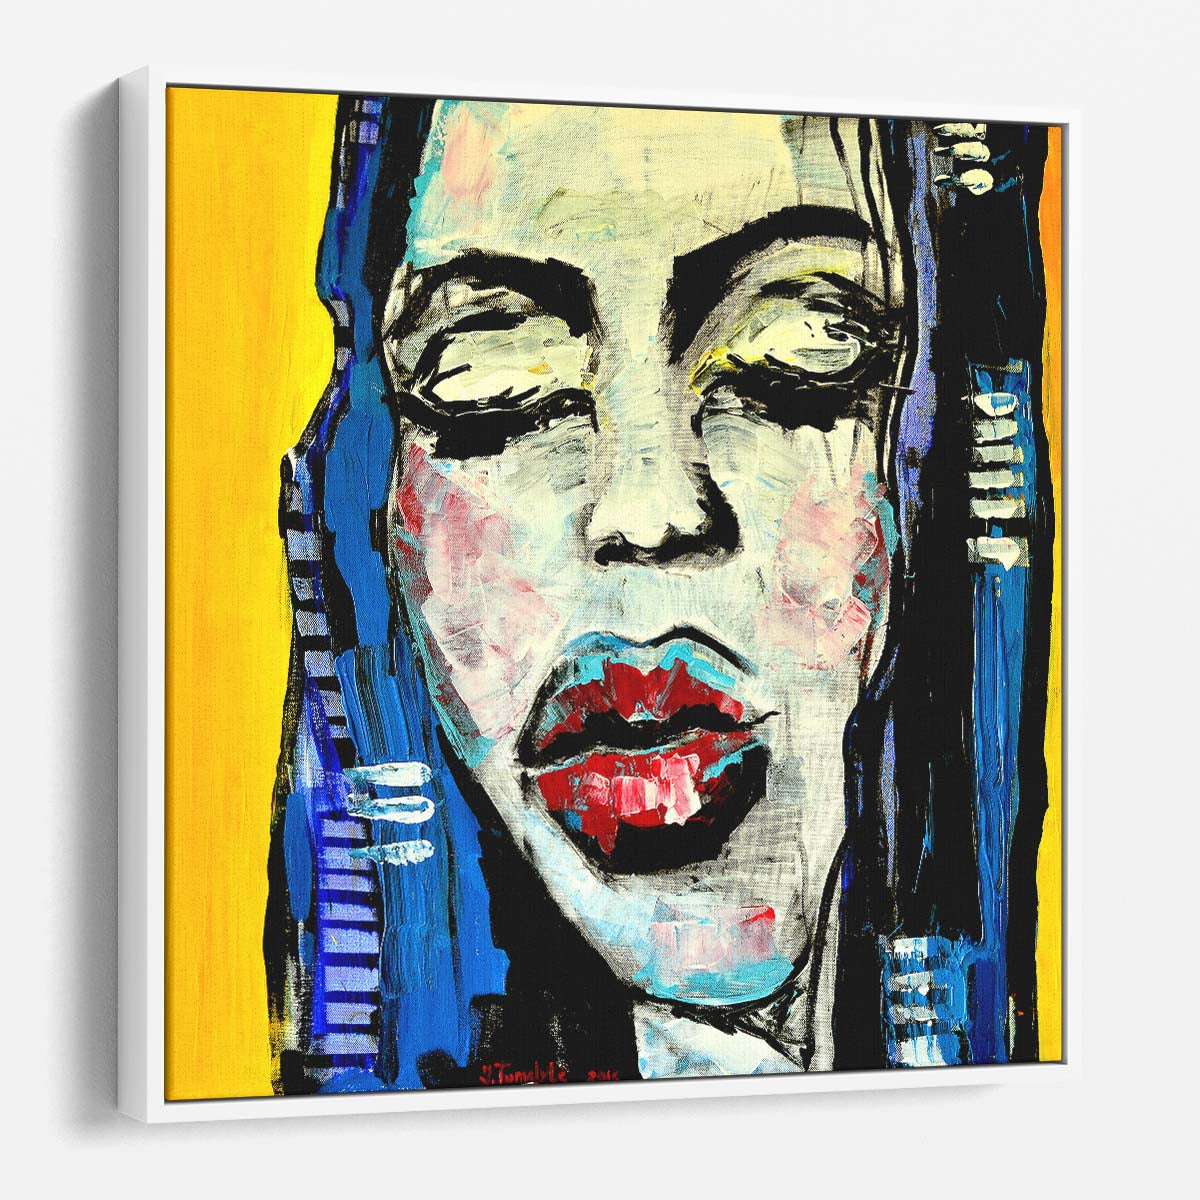 Expressive Woman Portrait Oil Painting by Julija Tumelyte Wall Art by Luxuriance Designs. Made in USA.